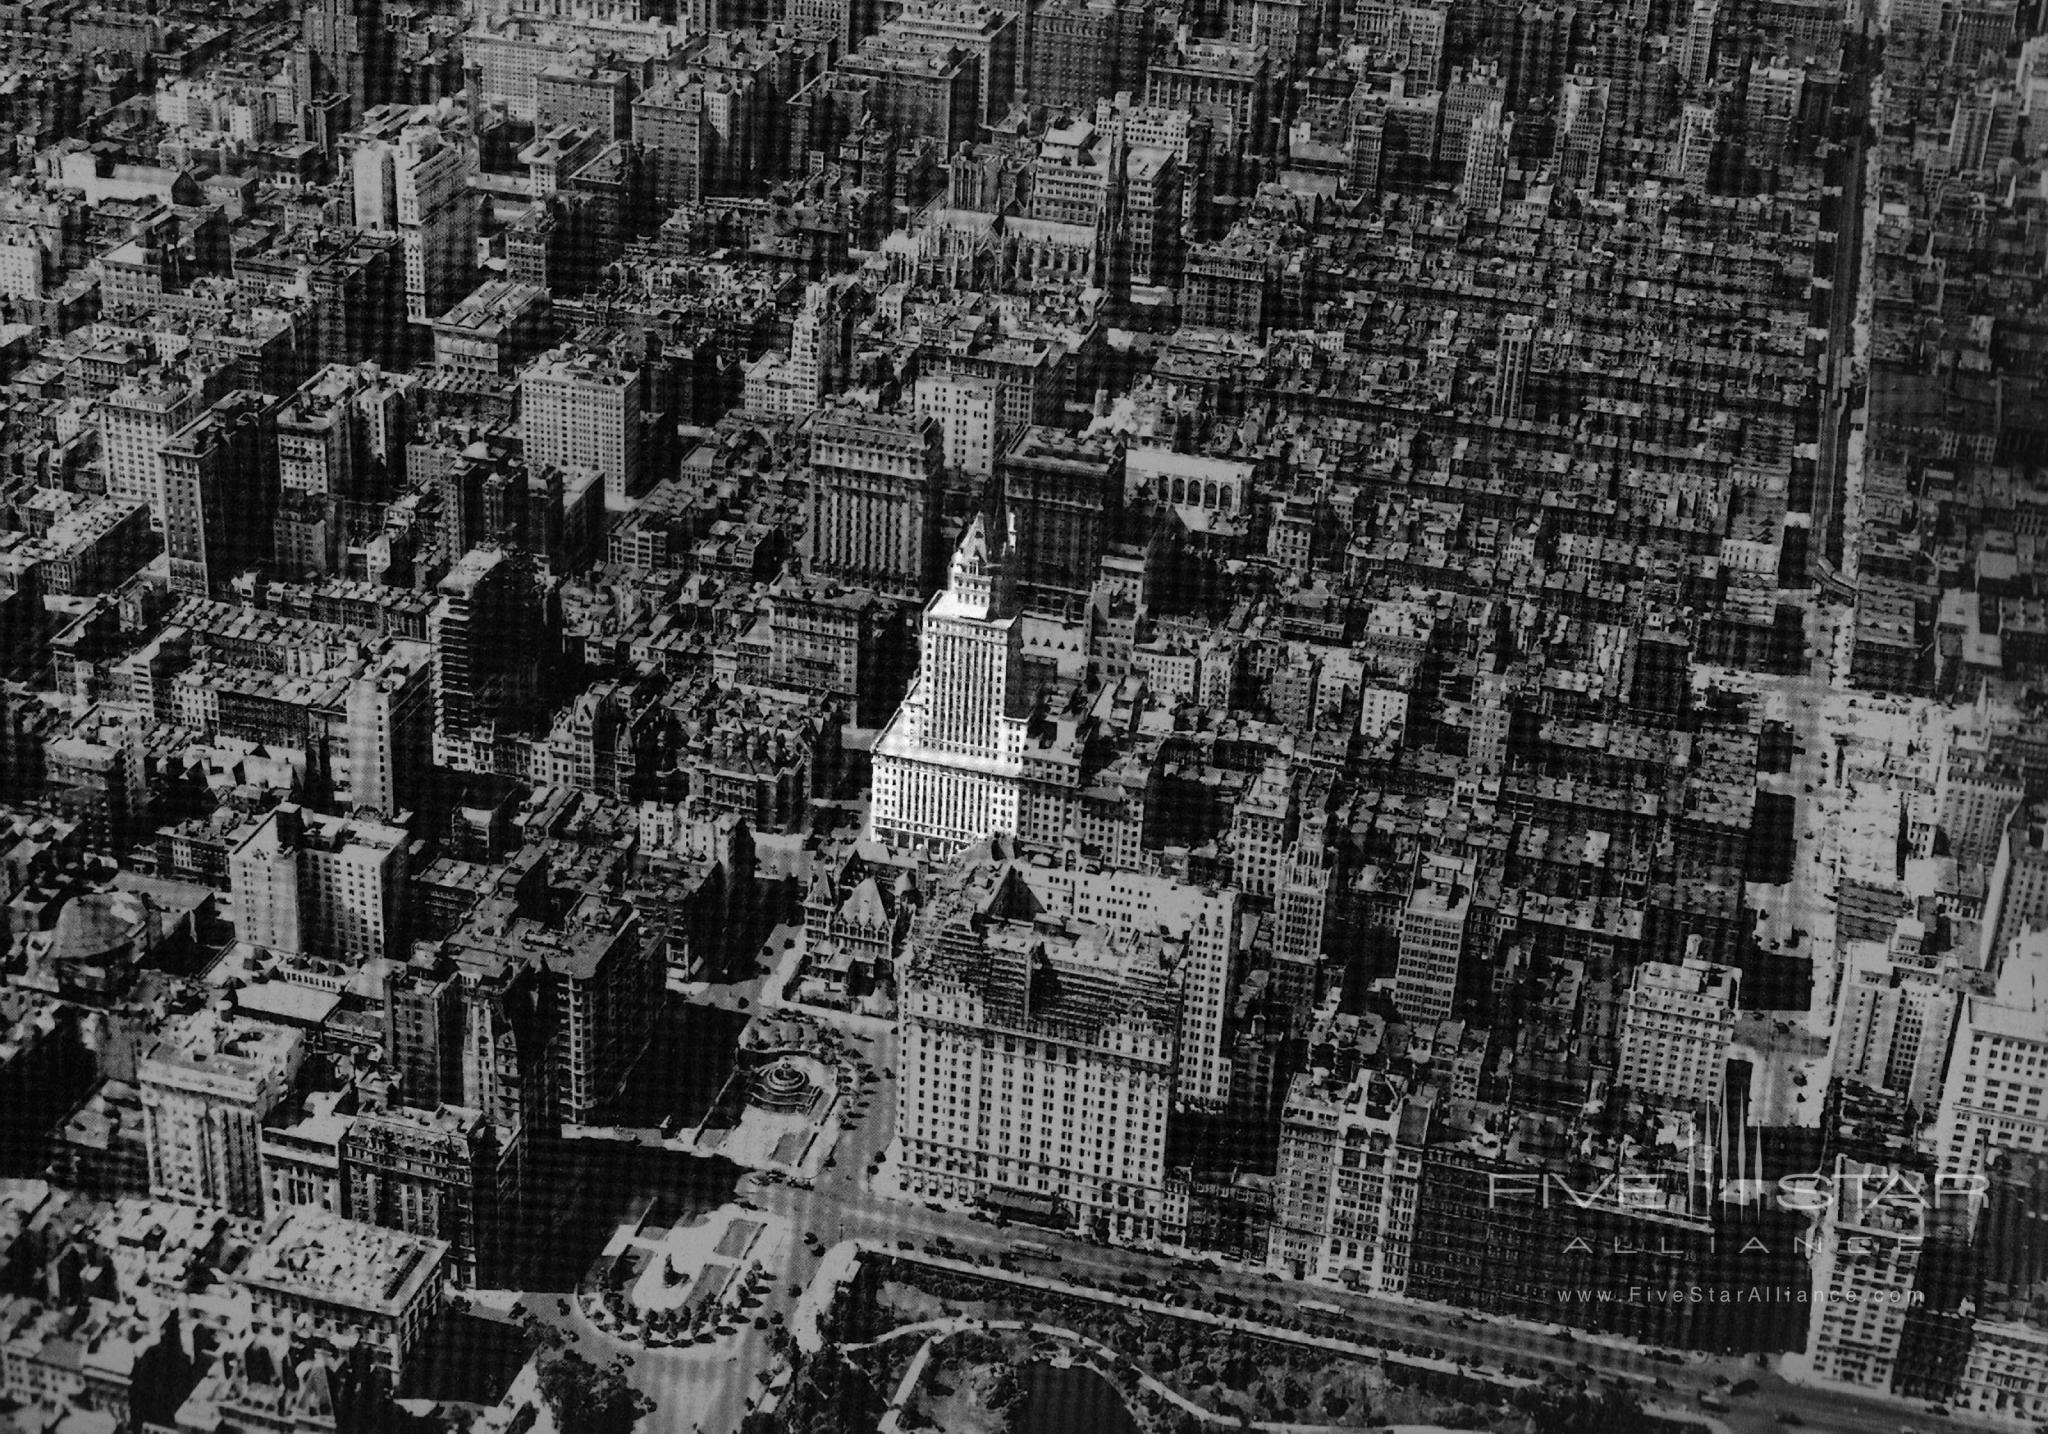 1925 View of the Crown Building in Midtown Manhattan